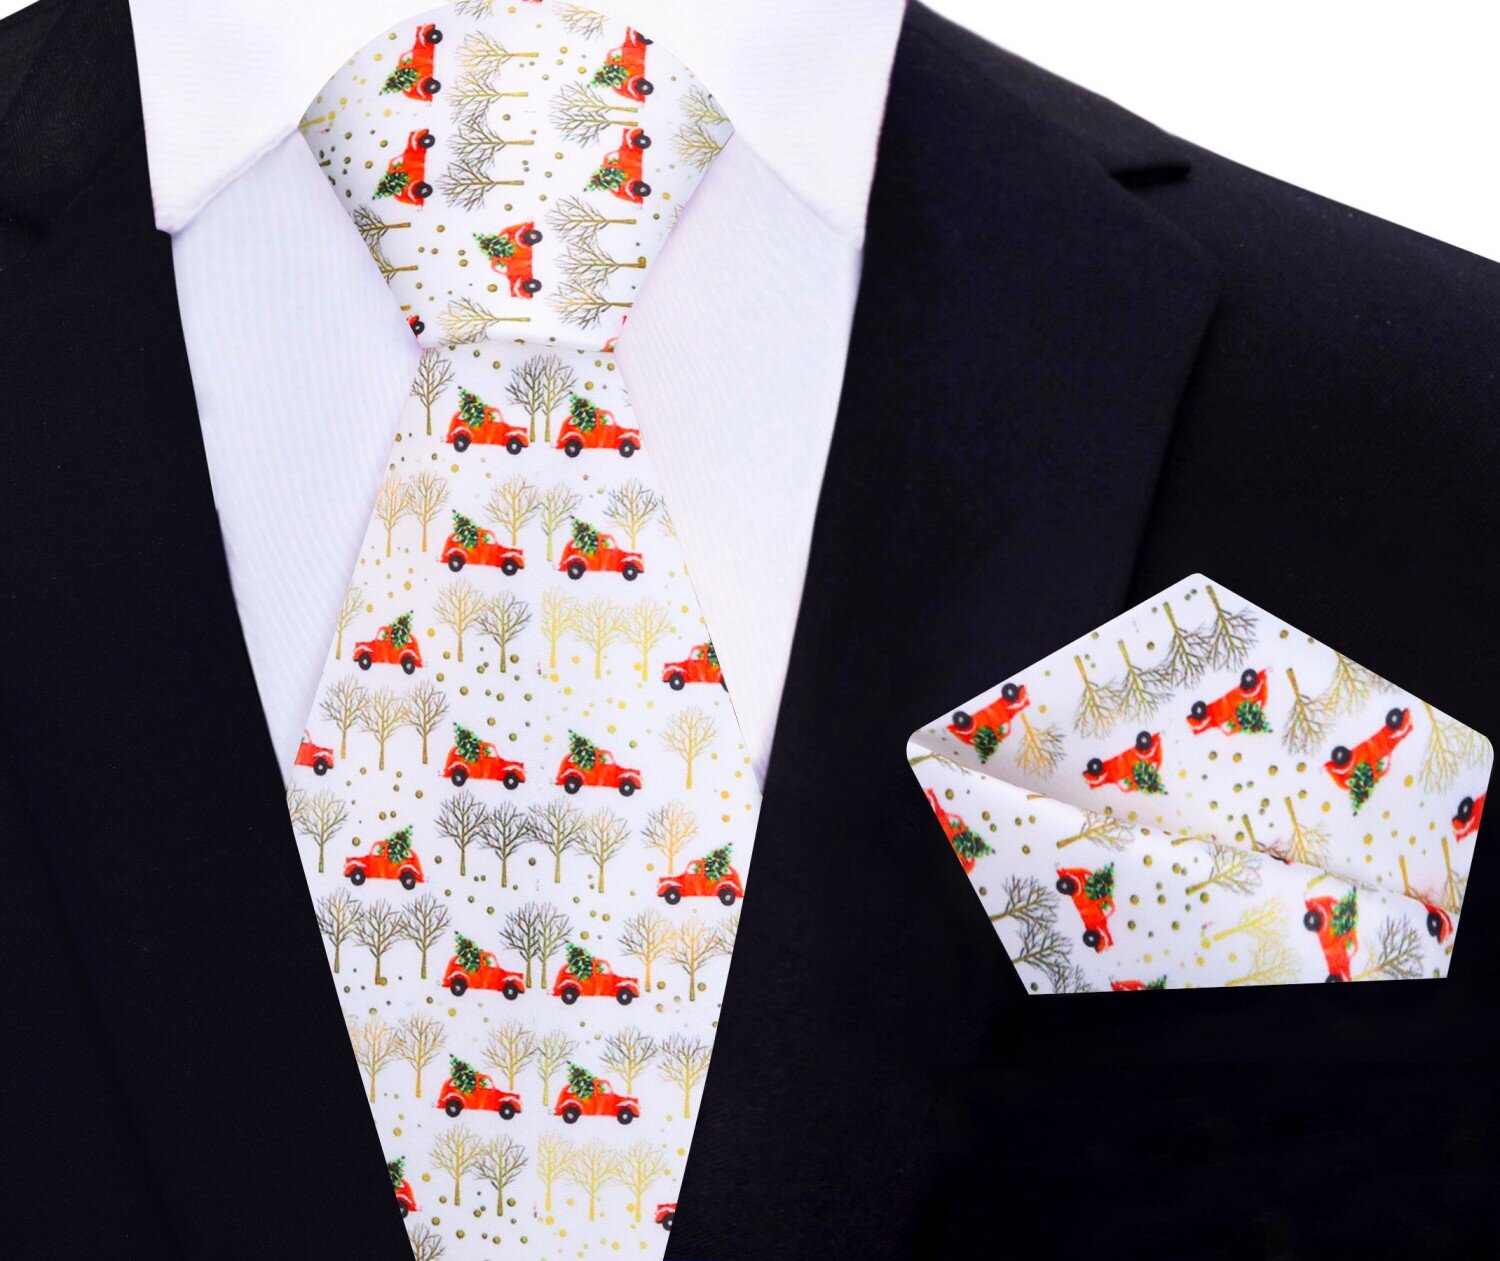 Main View: White, Red, Green, Gold Car Carrying Christmas Tree Tie And Pocket Square